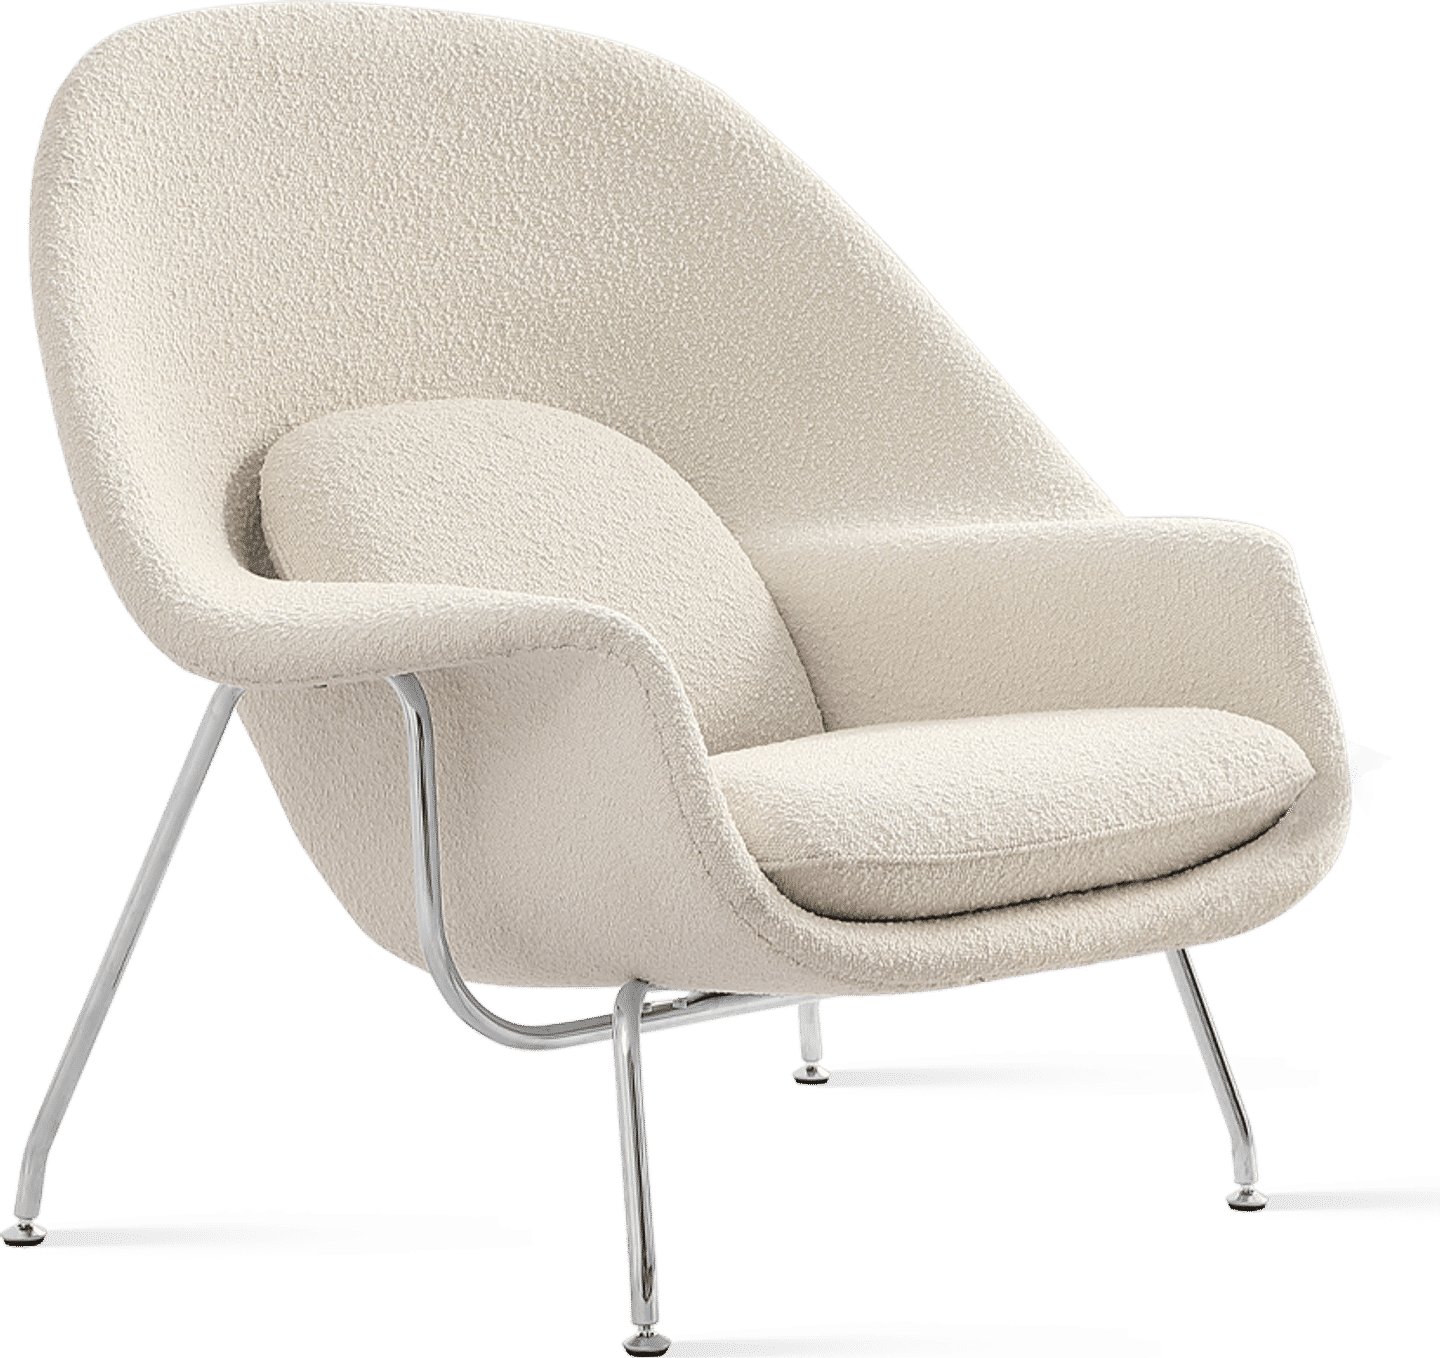 Womb Chair - Schnalle Creamy Boucle/Boucle image.